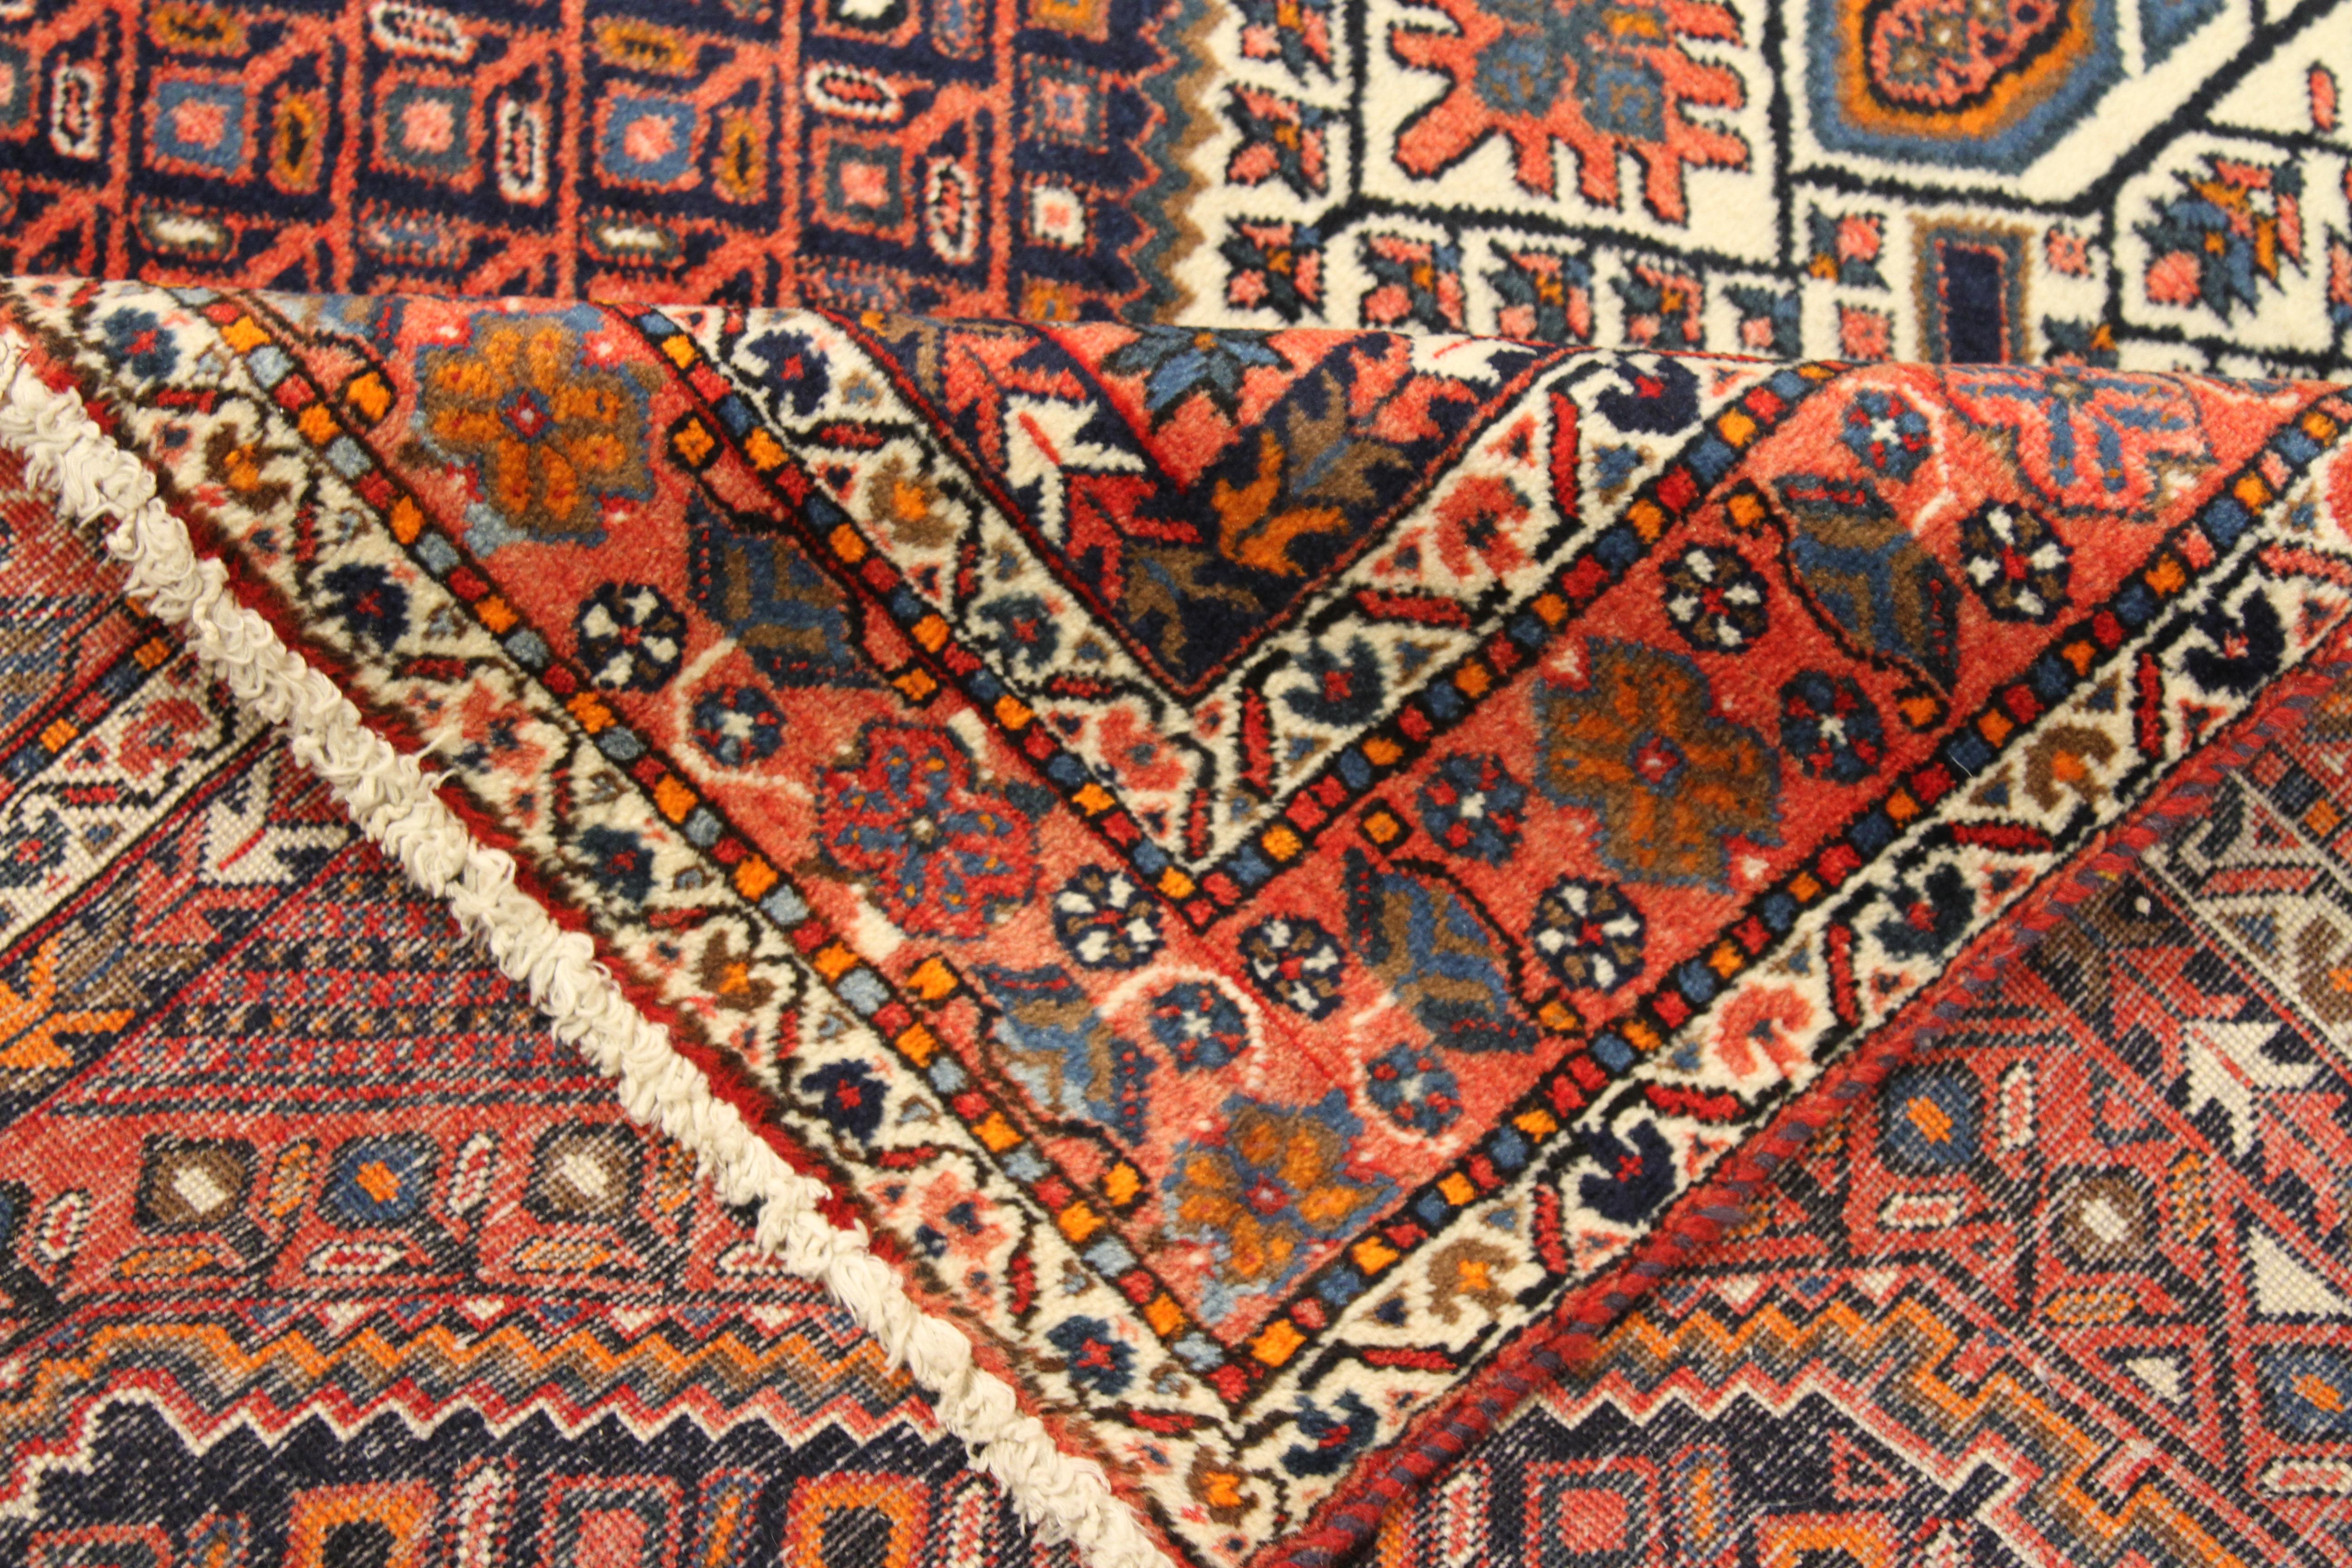 Mid-20th Century Hand-Woven Persian Accent Rug Sirjan Design In Excellent Condition For Sale In Dallas, TX